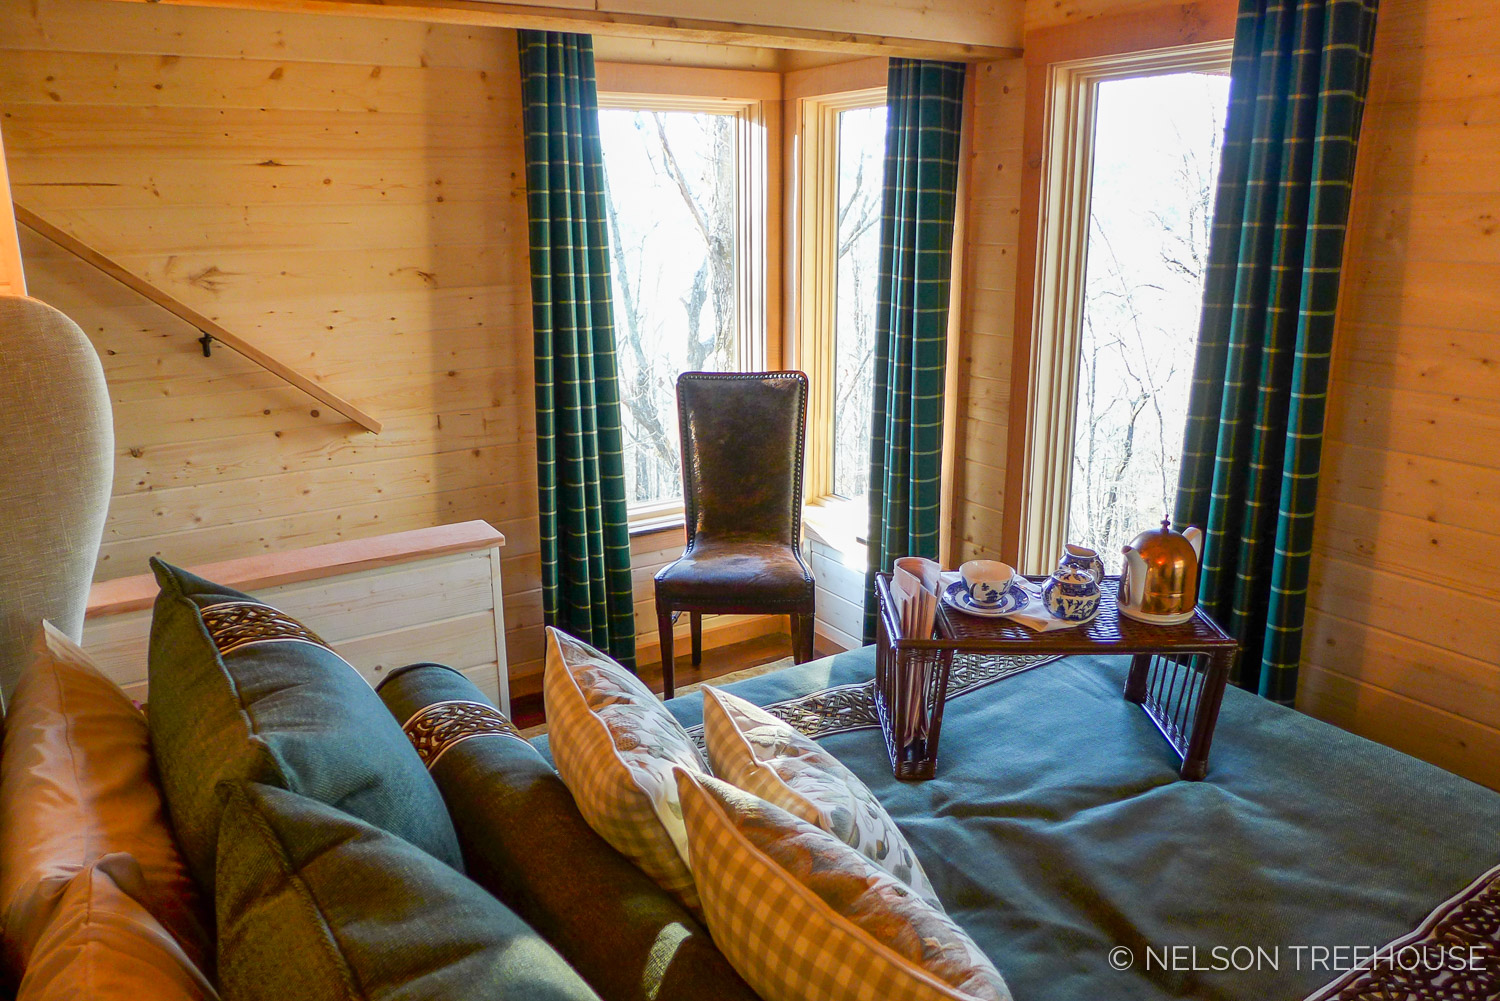  Super Spy Treehouse - Nelson Treehouse 2018 - Bedroom view 